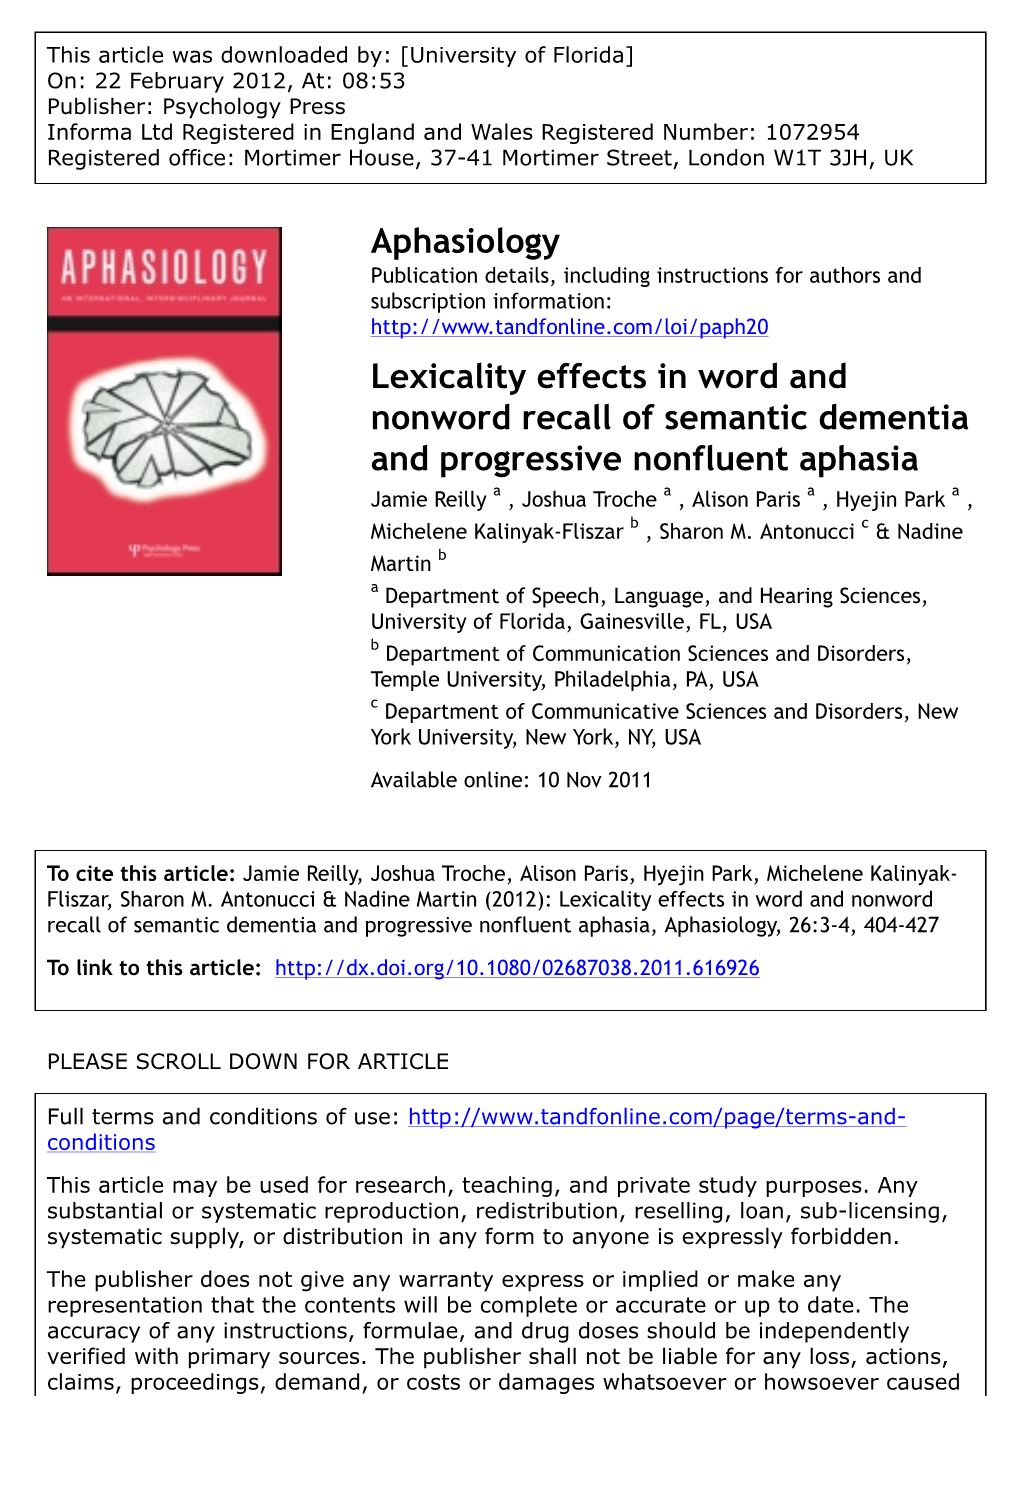 Lexicality Effects in Word and Nonword Recall of Semantic Dementia